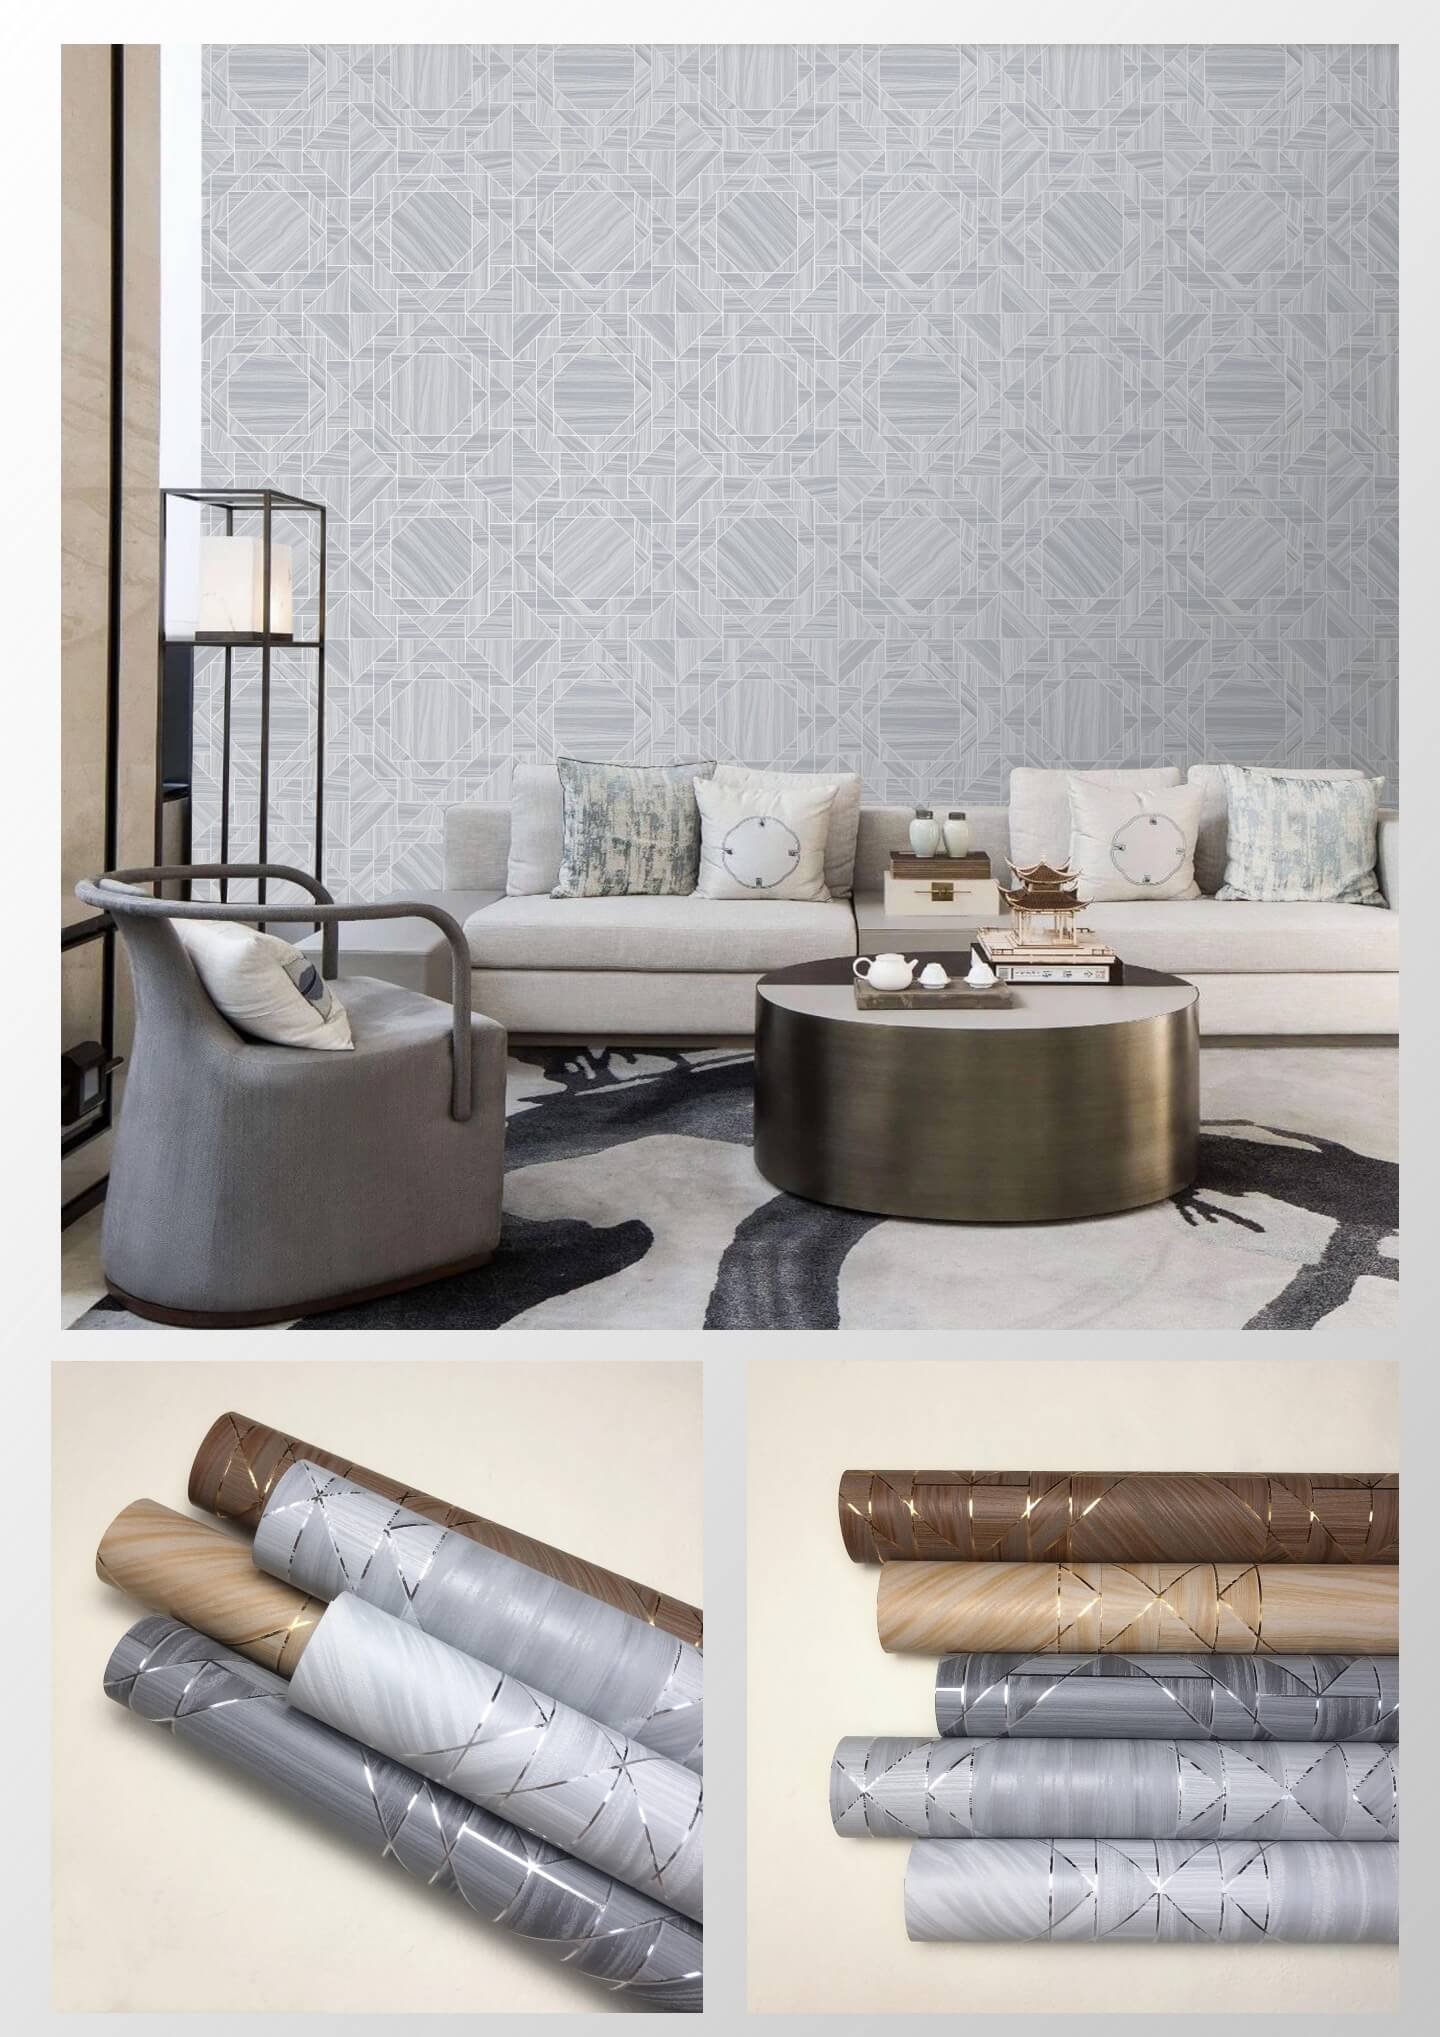 3D Metallic Wallpaper Wallcoverings For Home Hotel Wall Decoration (4)